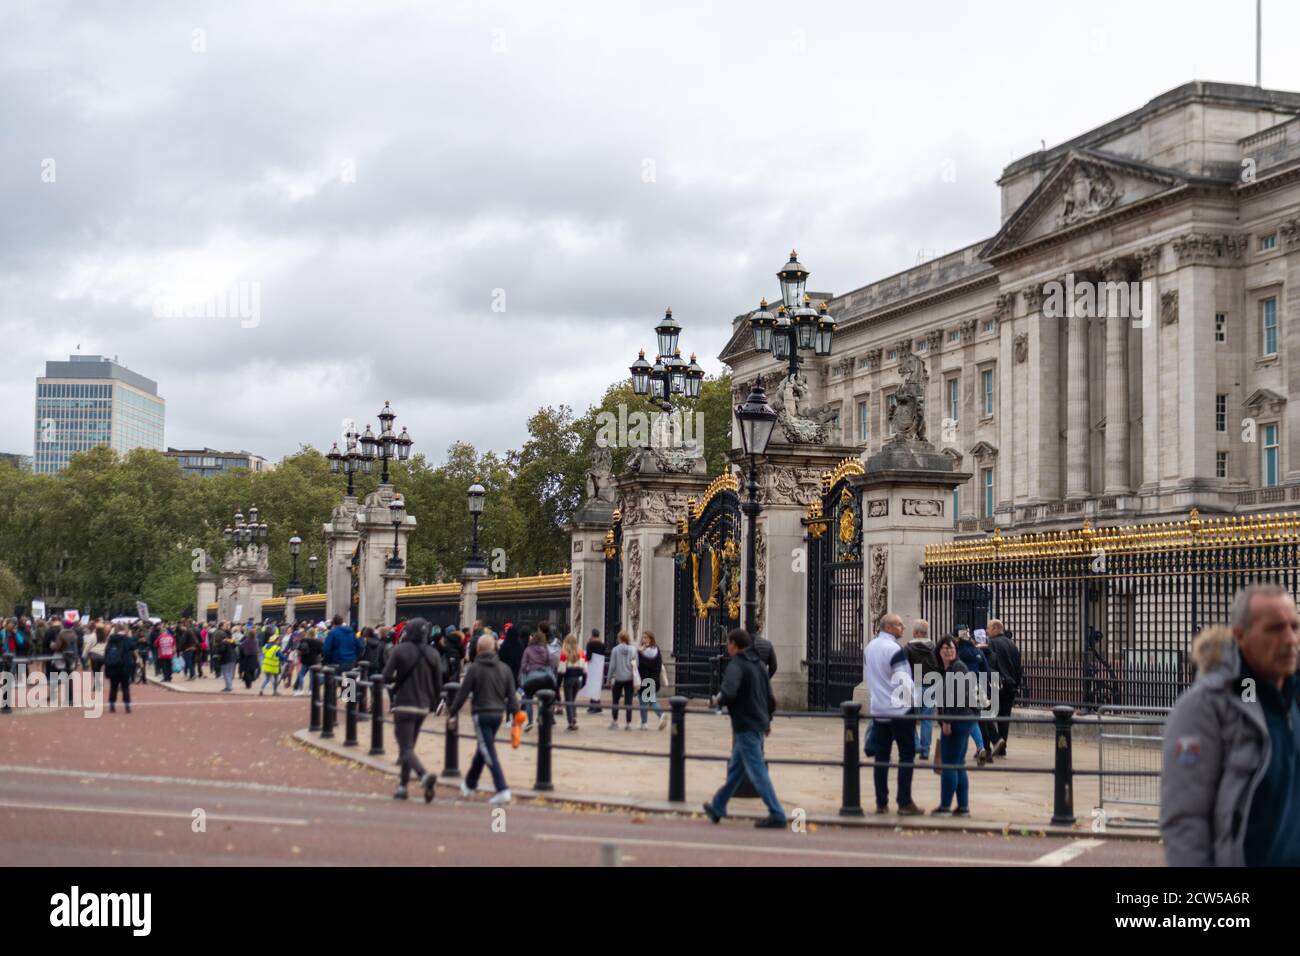 London, UK - 26th September 2020: Peaceful of anti mask protests outside Buckingham Palace Westminster in London with police and protestors Stock Photo